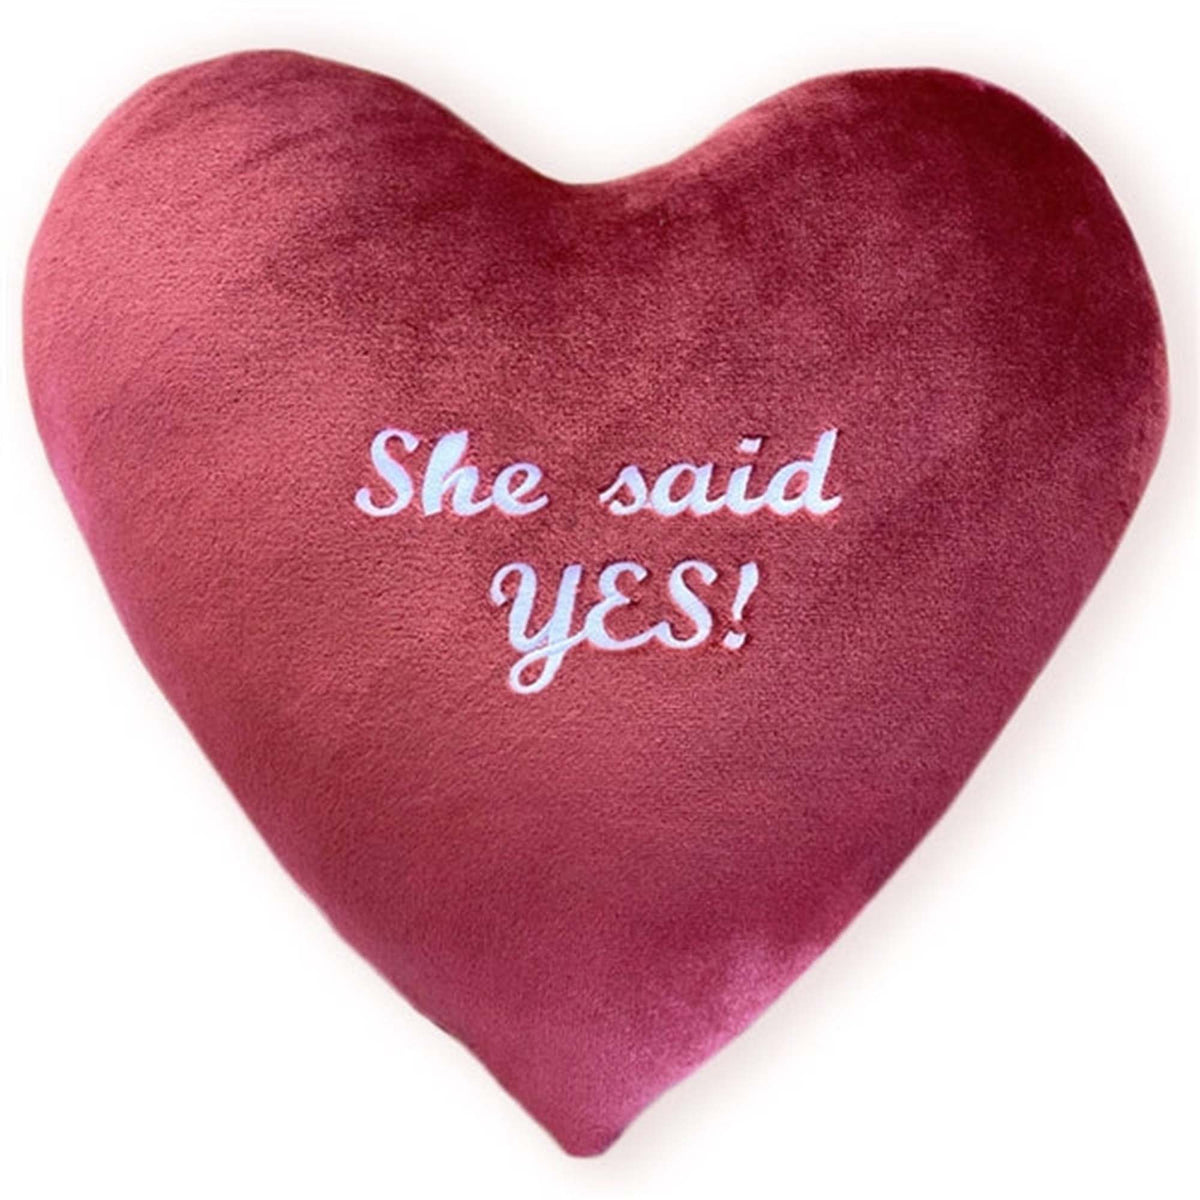 &quot;She Said YES!&quot; embroidered heart pillow - luster loft fleece heart pillow - Luster Loft Fleece - American Blanket Company